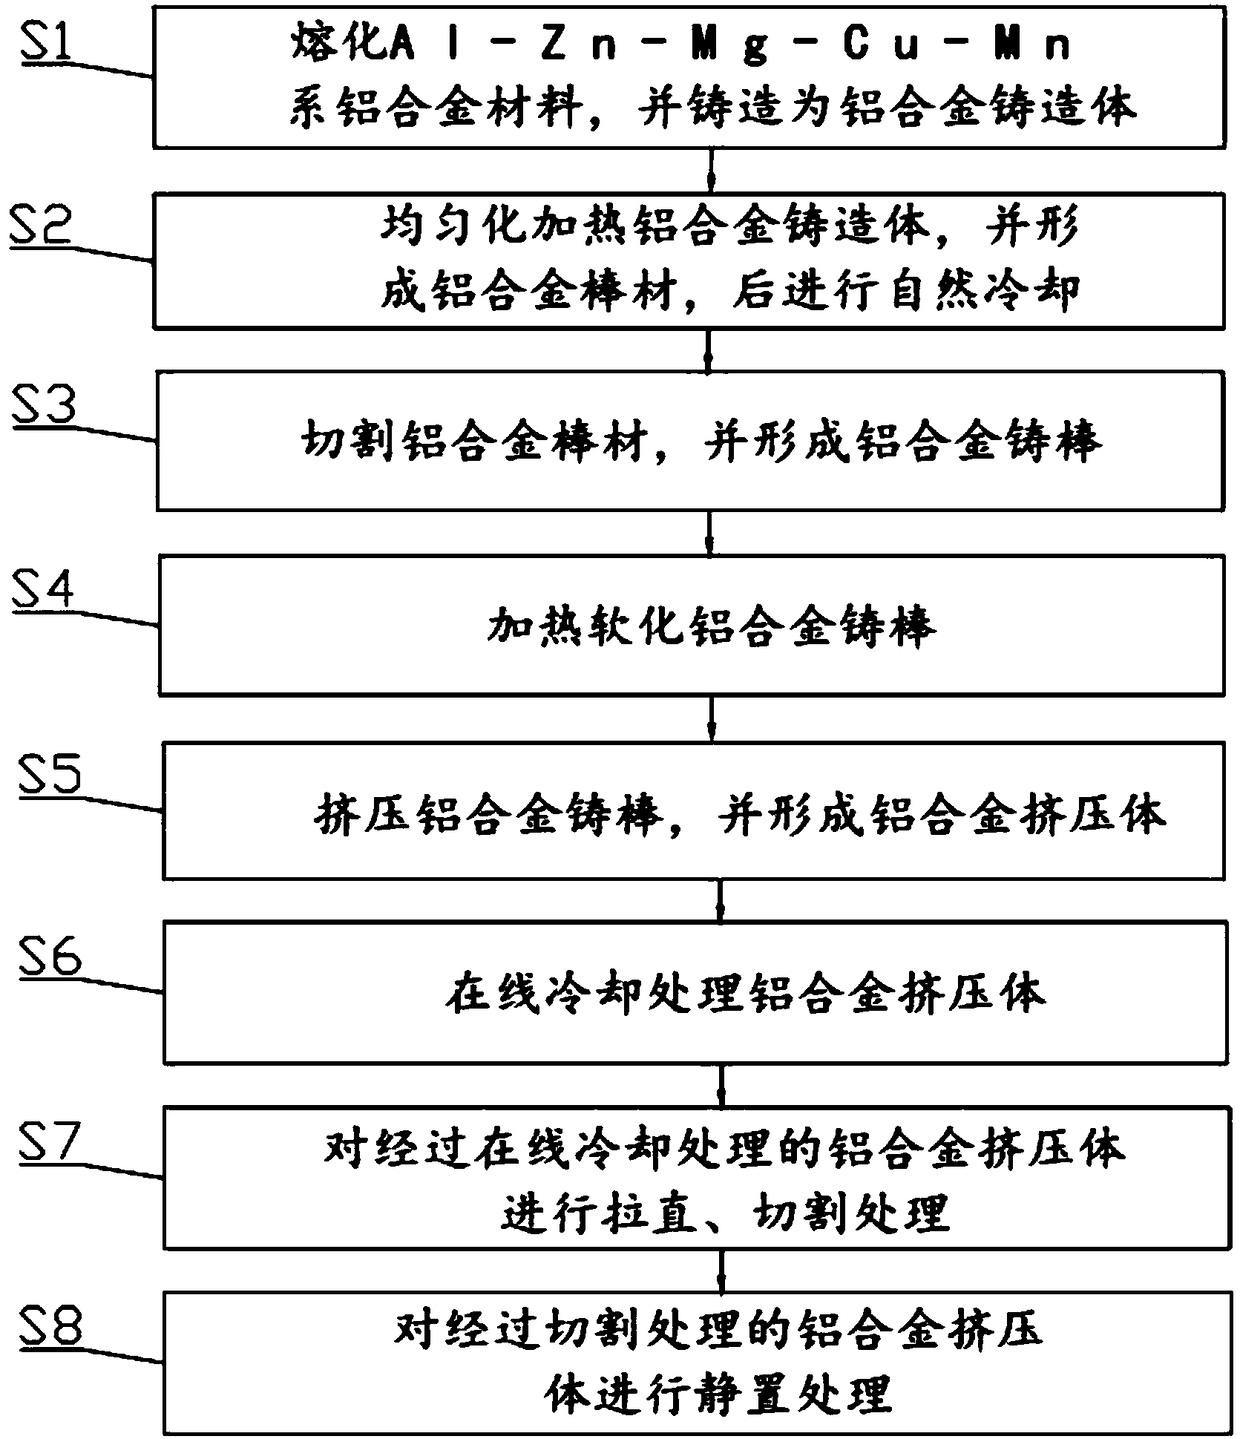 Al-Zn-Mg-Cu-Mn aluminum alloy and preparation process thereof